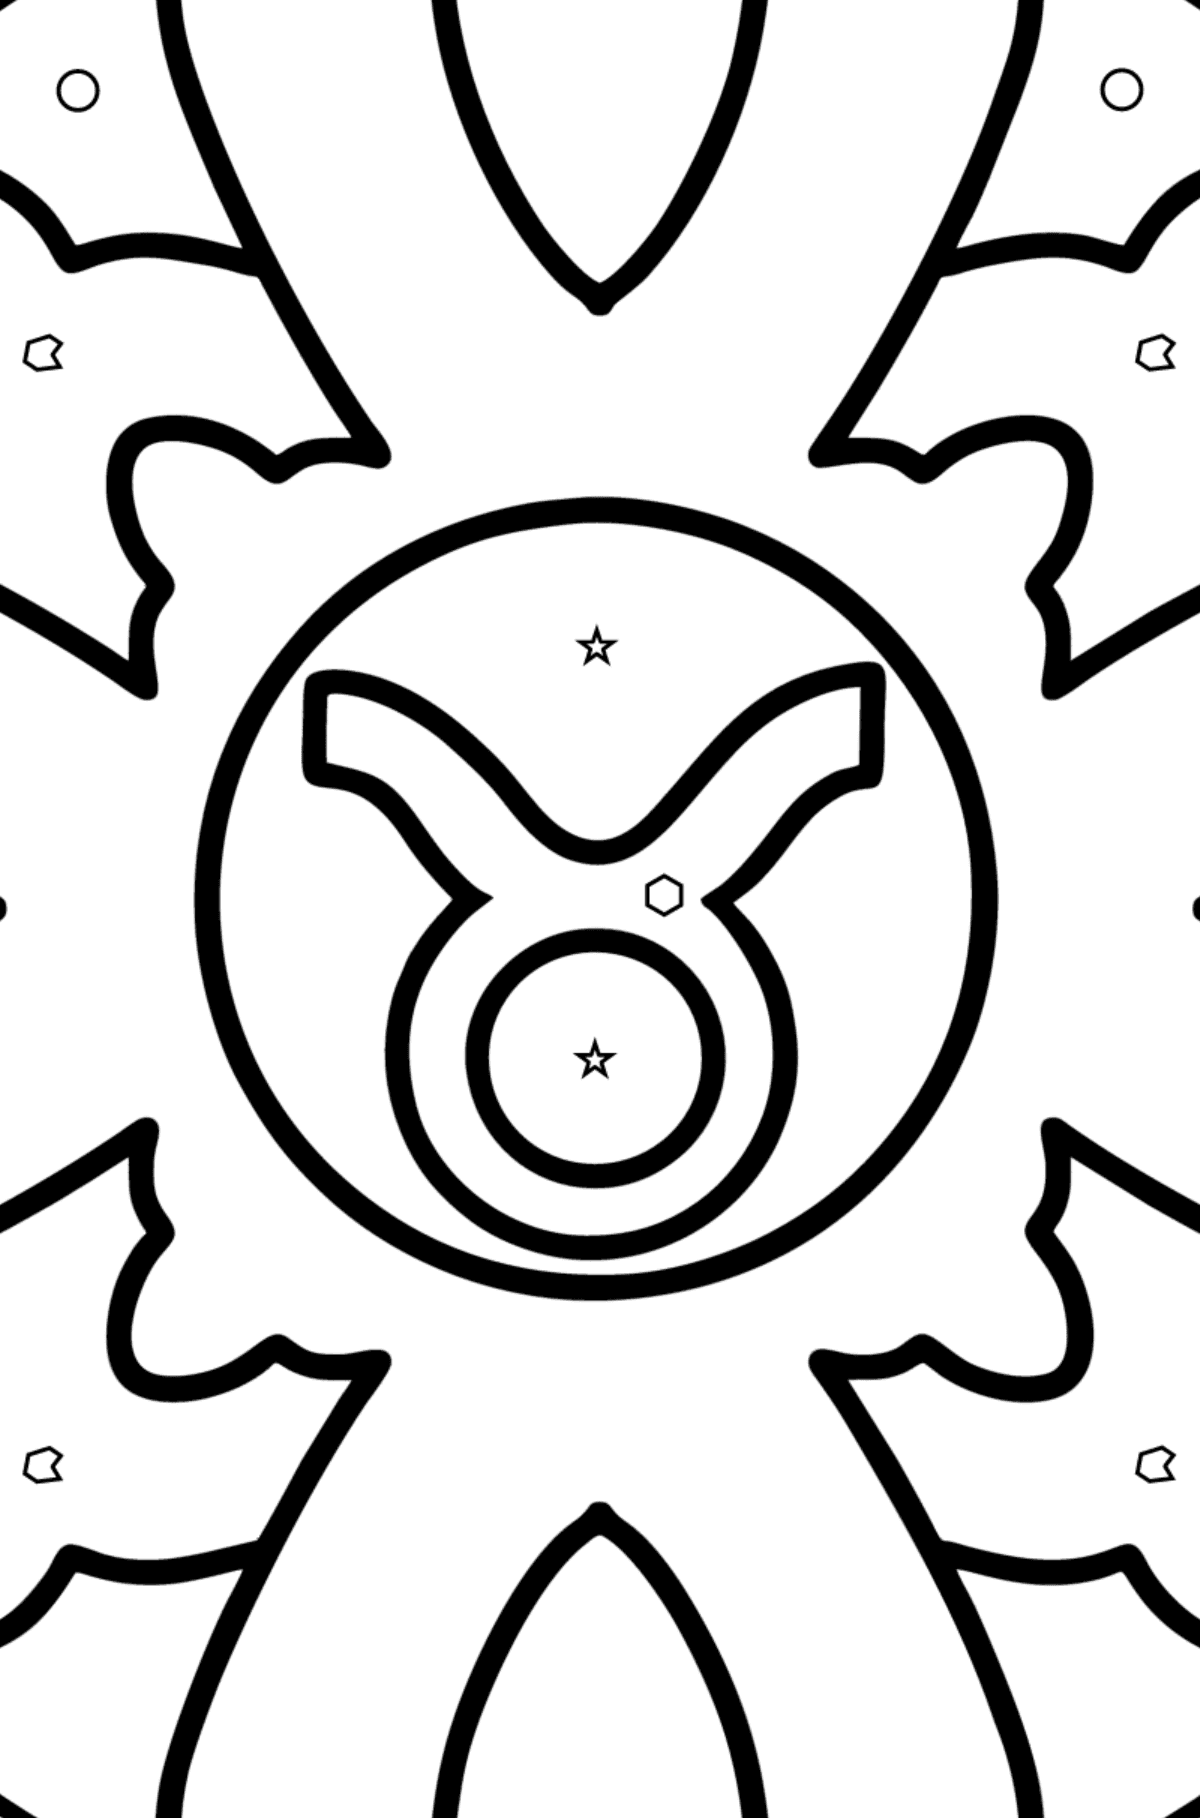 Coloring page - zodiac sign Taurus - Coloring by Geometric Shapes for Kids